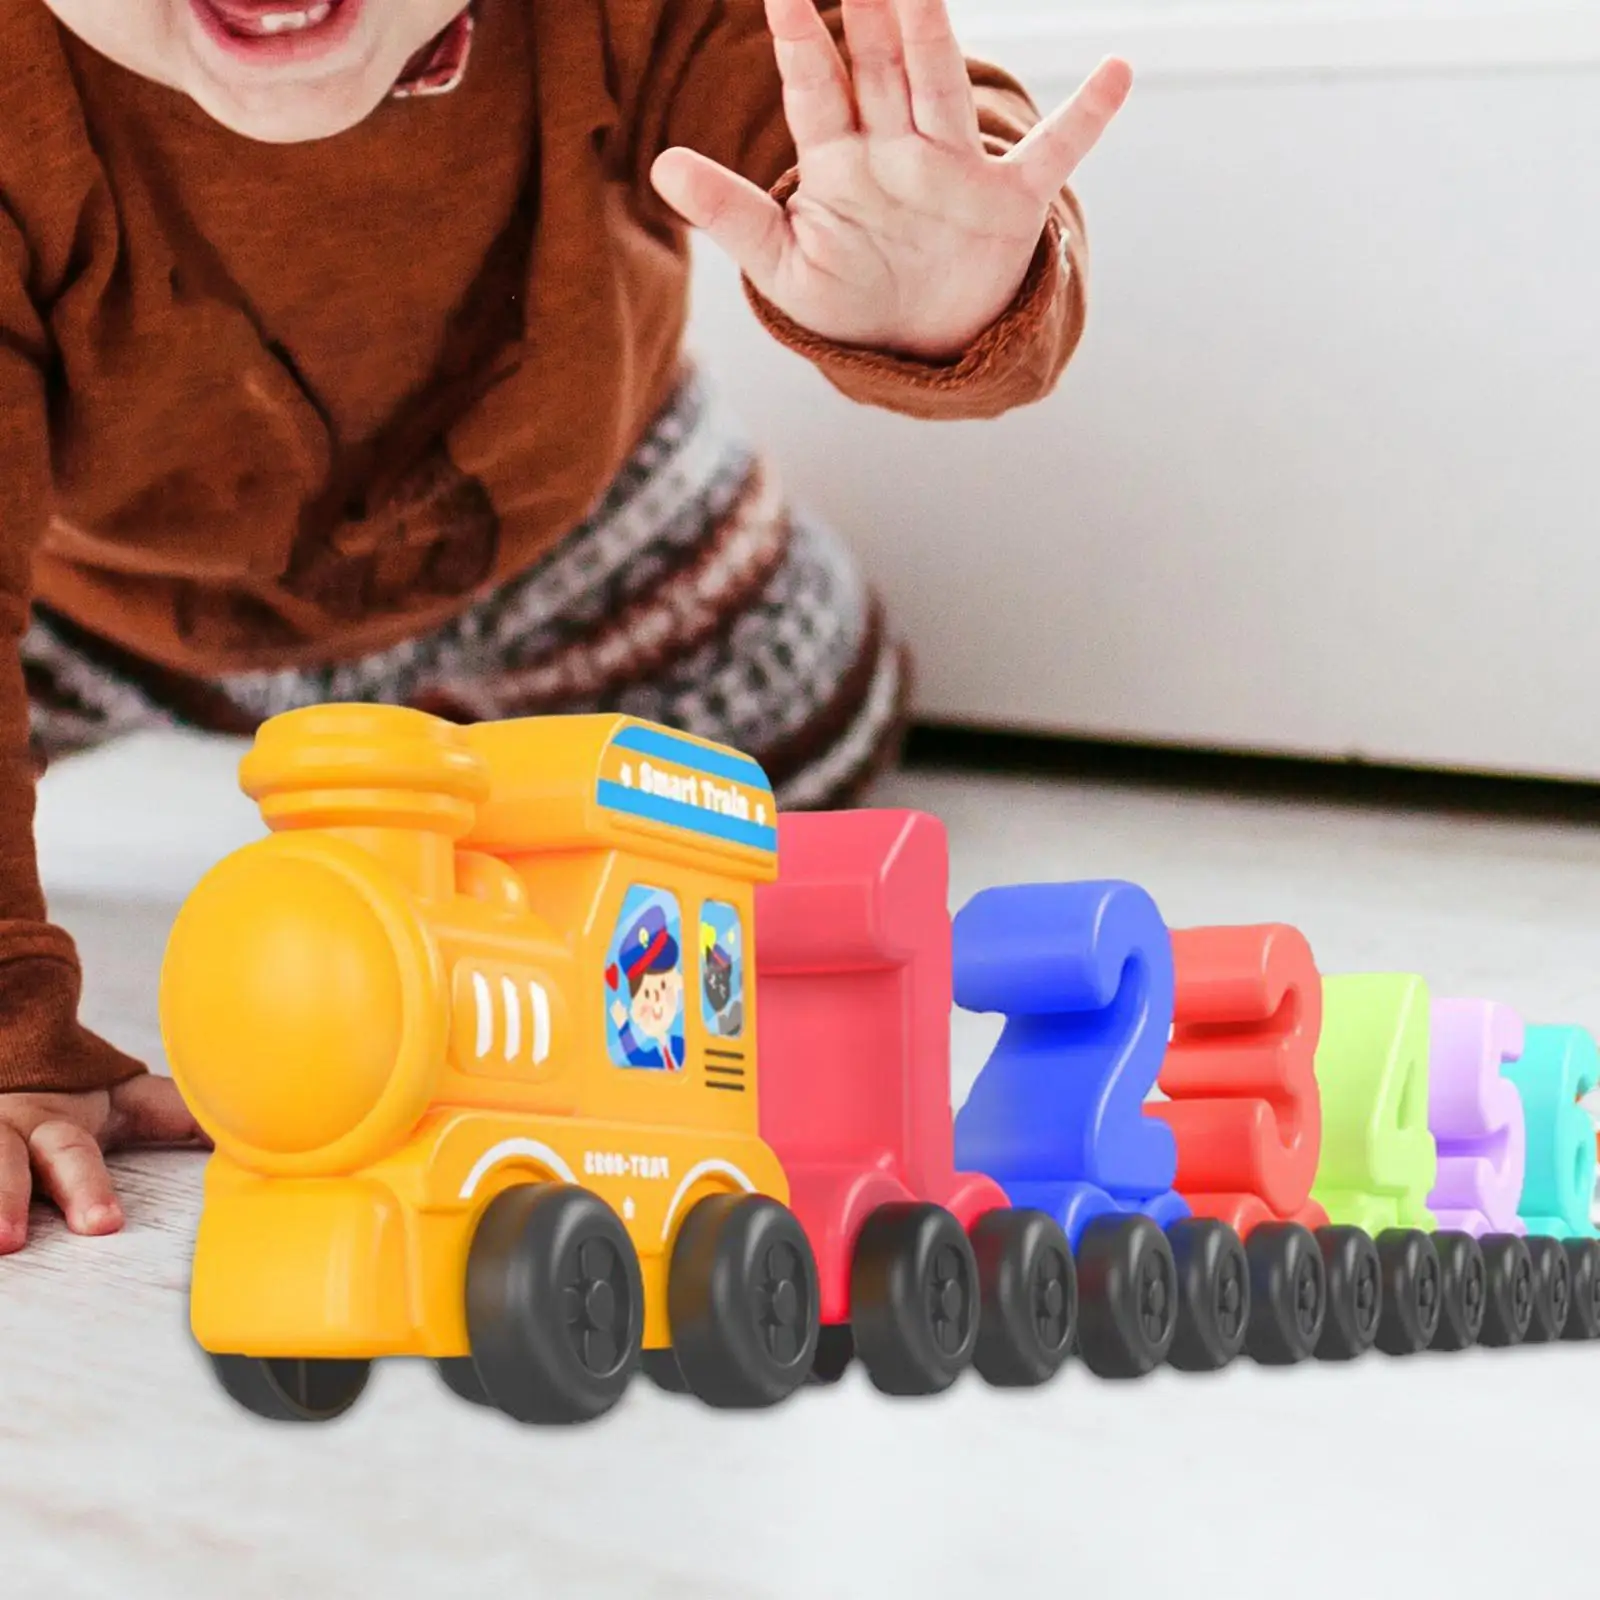 Wooden Train Set Play Set Developmental Toy Interactive Toys with Locomotive Wooden Number Train Set for Interaction Outdoor